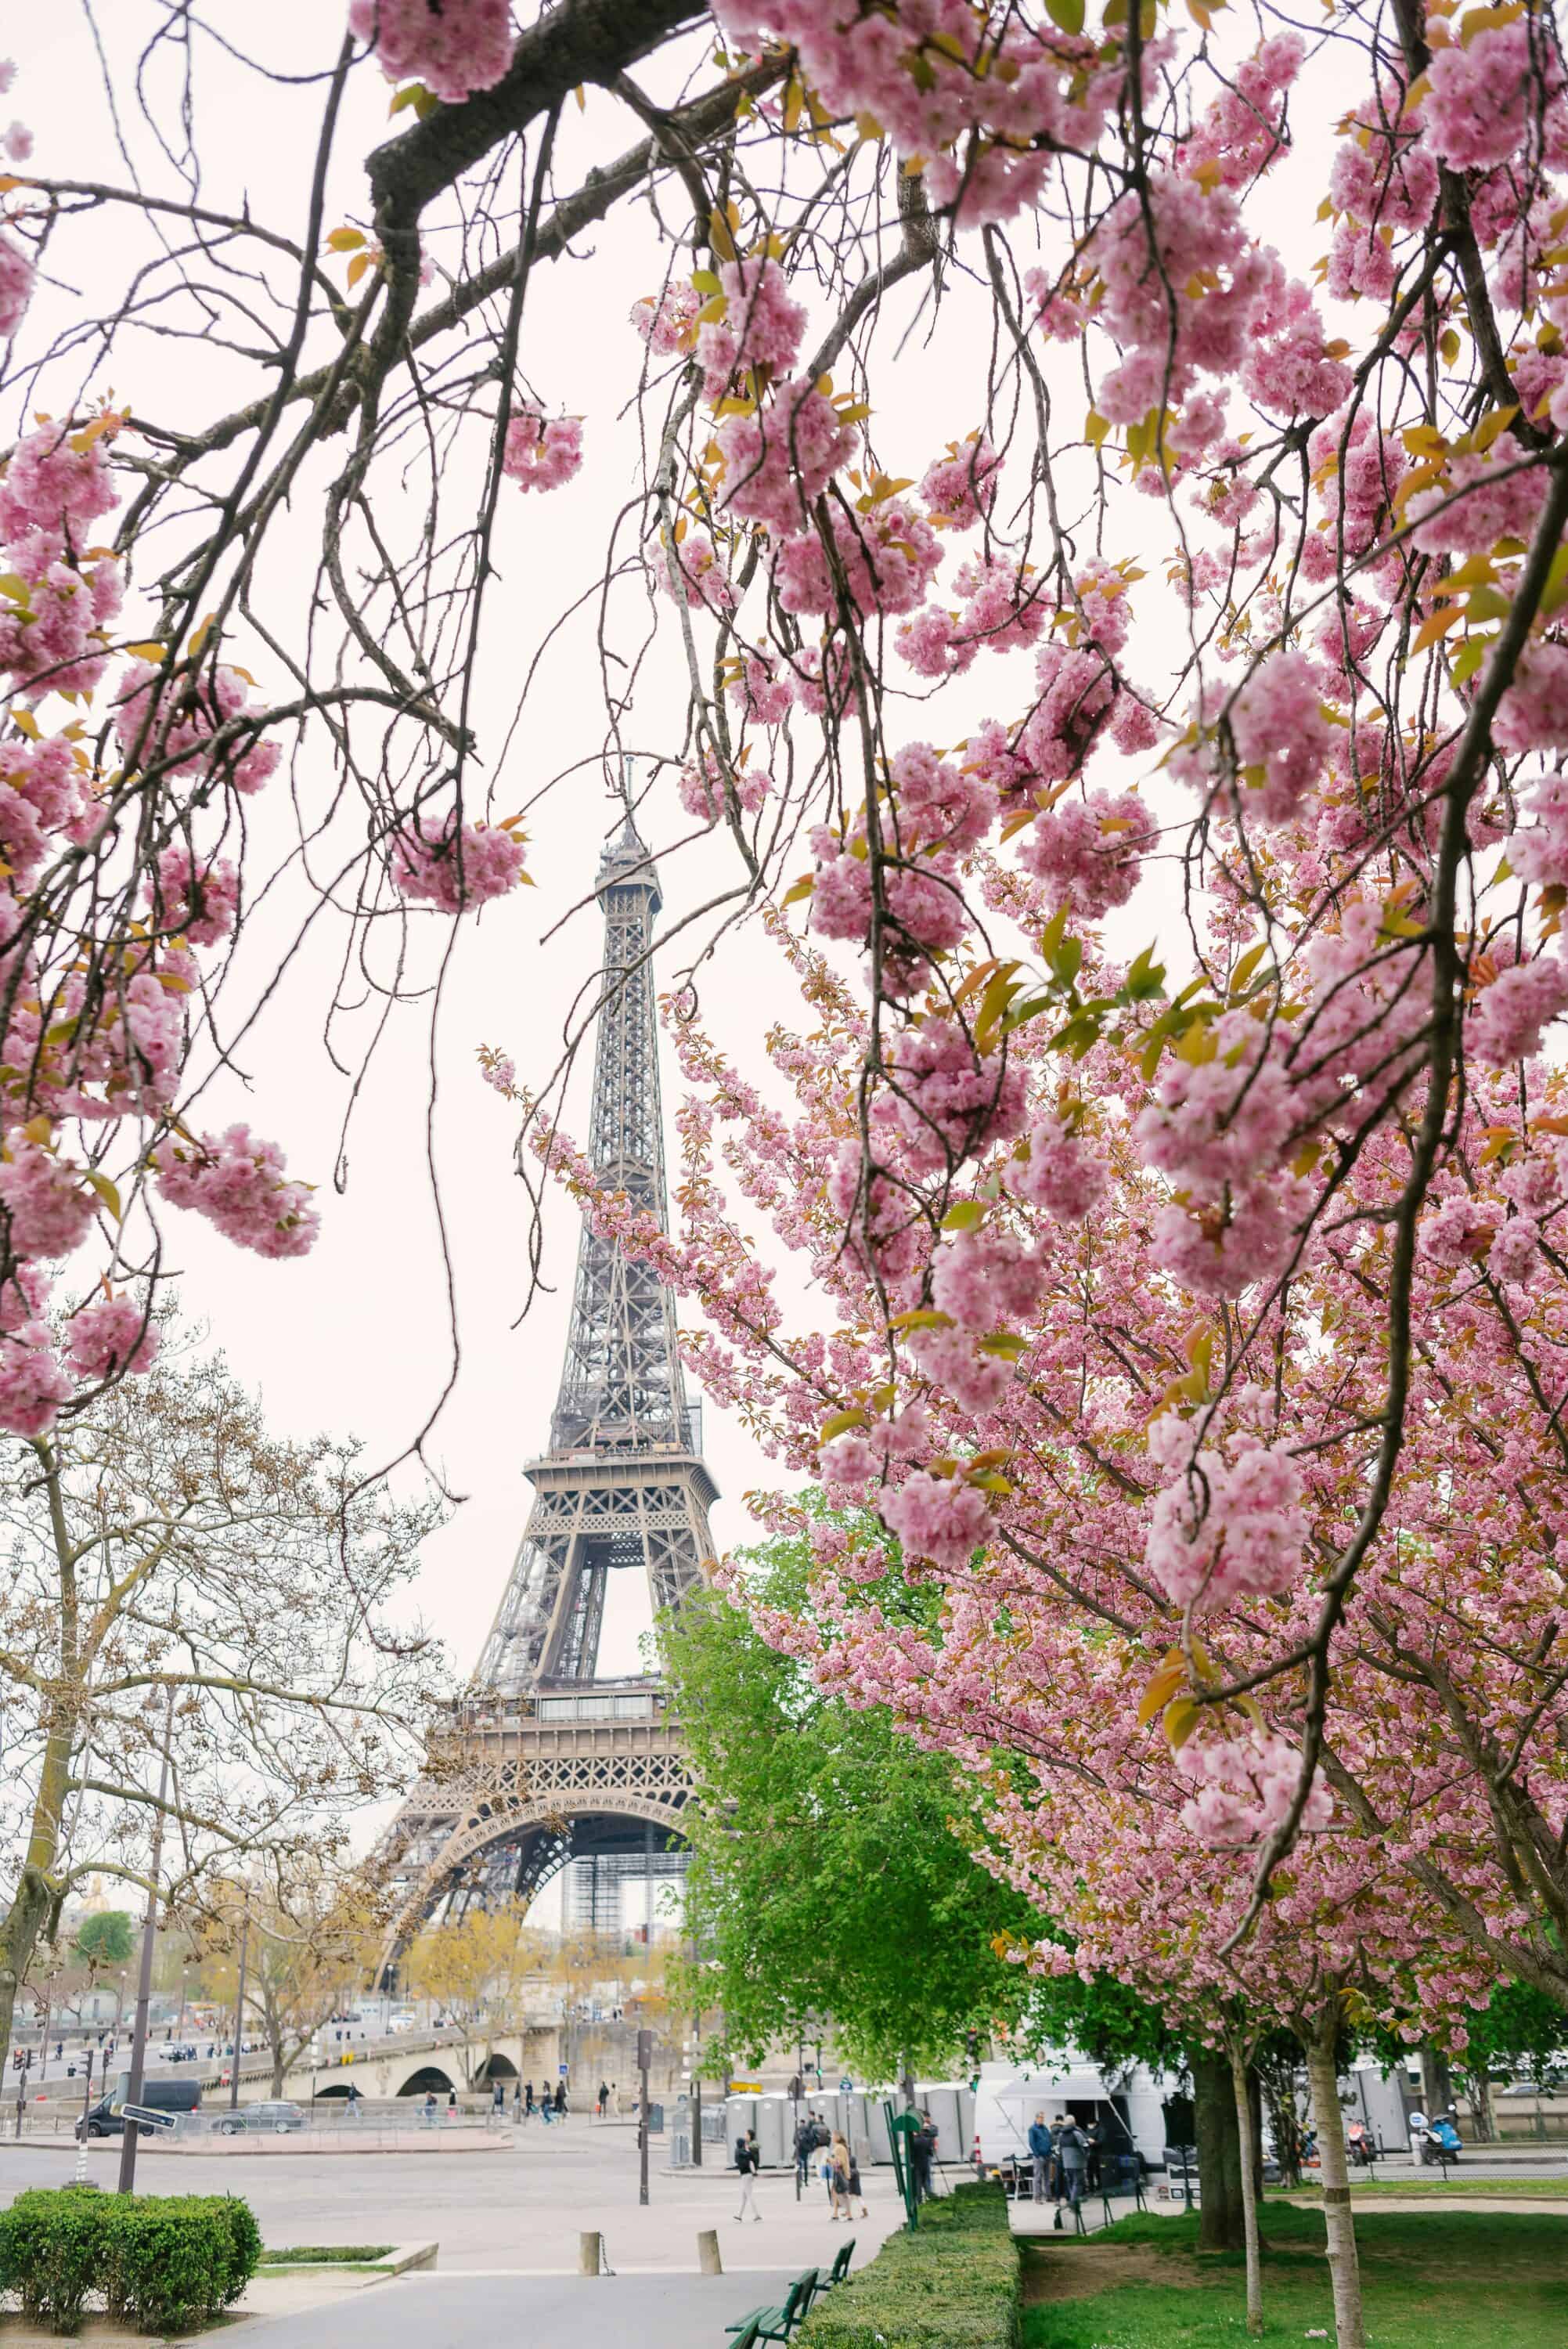 Cherry blossom trees line the street leading up to the Eiffel Tower.